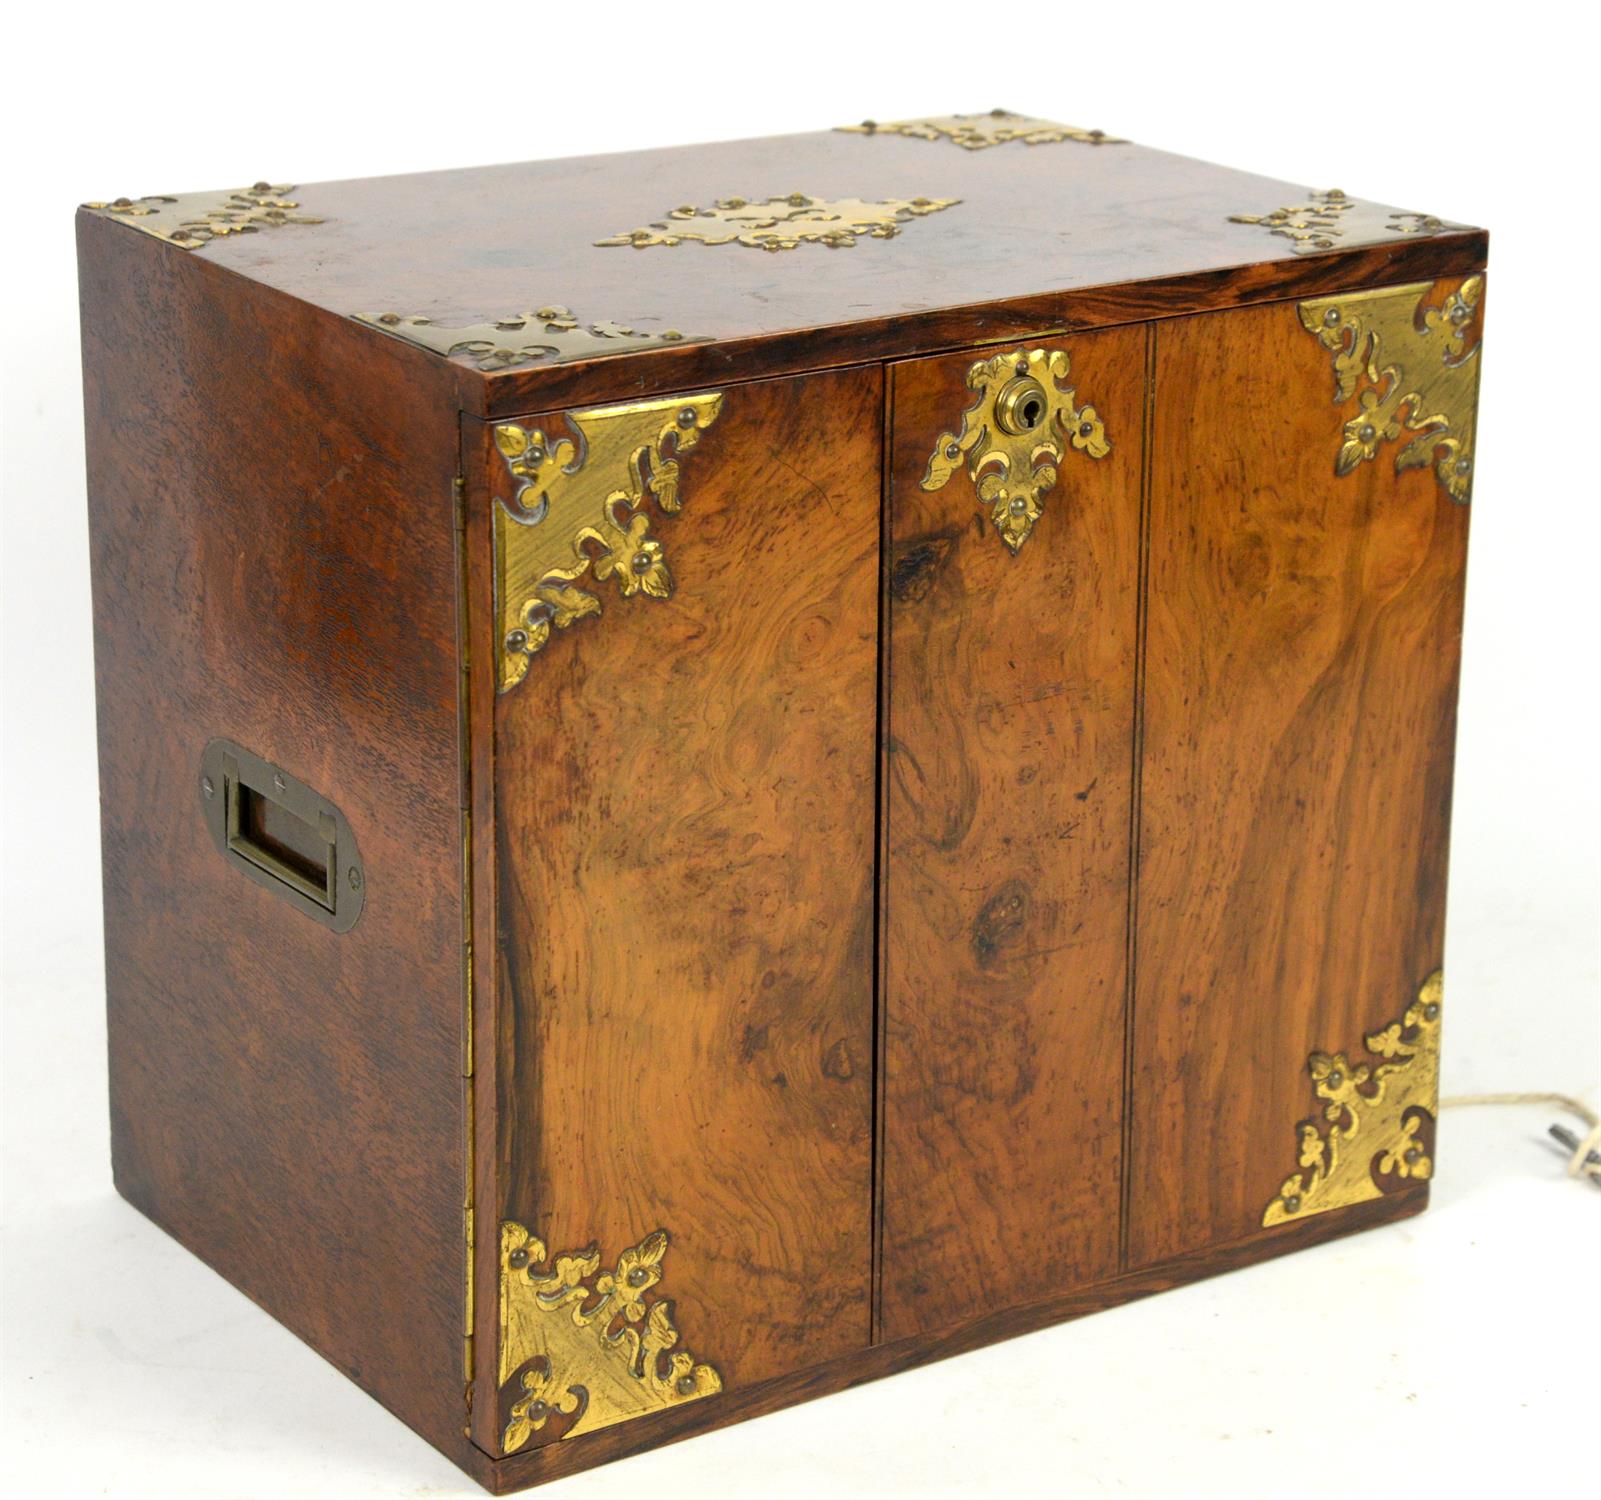 Late 19th century burr walnut and brass mounted cigar chest with two doors enclosing three drawers, - Image 3 of 3